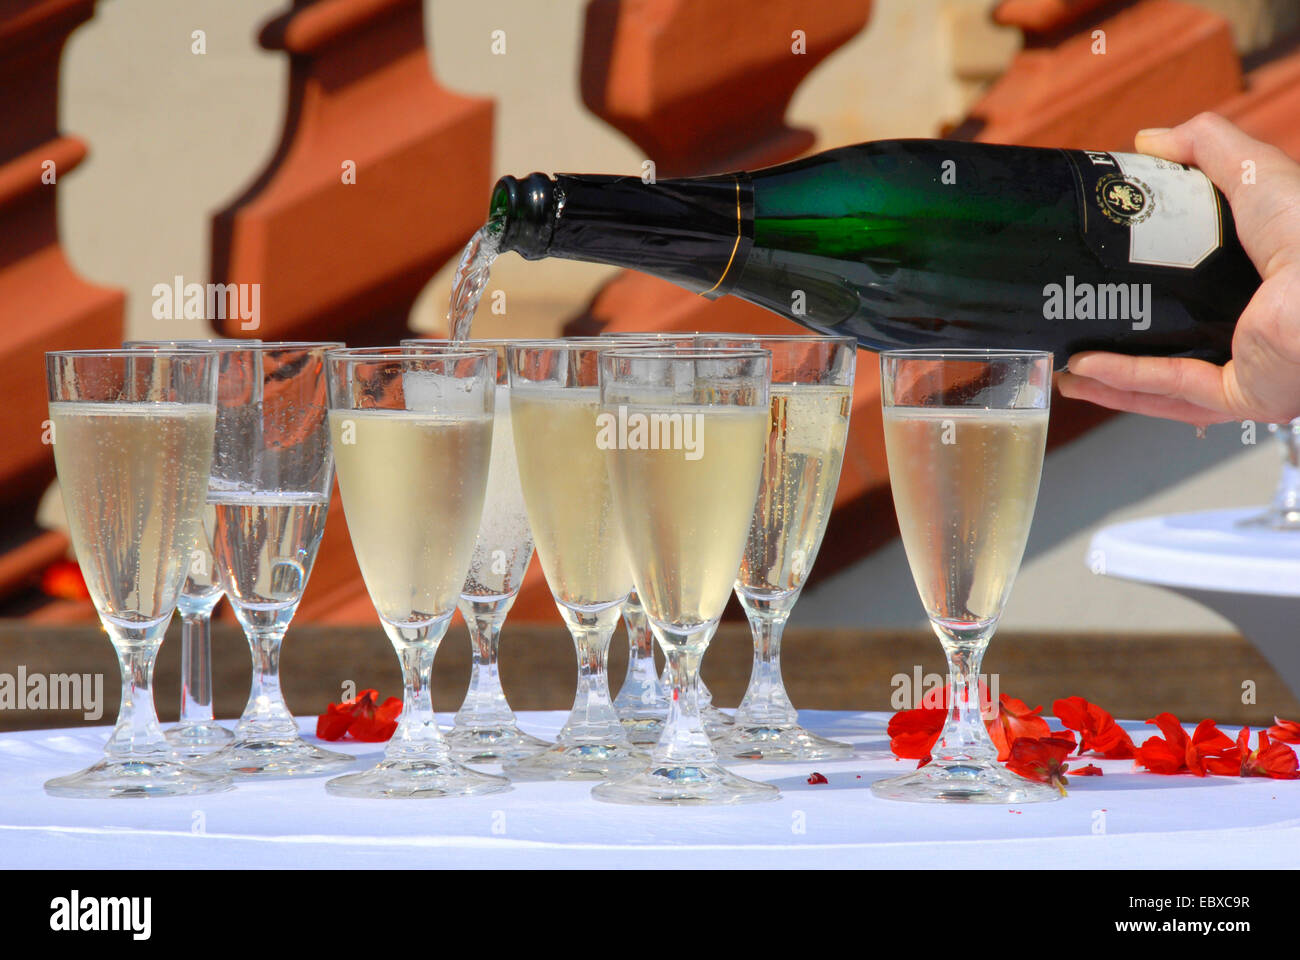 sparkling wine is being poured into glasses, Germany, Rhineland-Palatinate Stock Photo